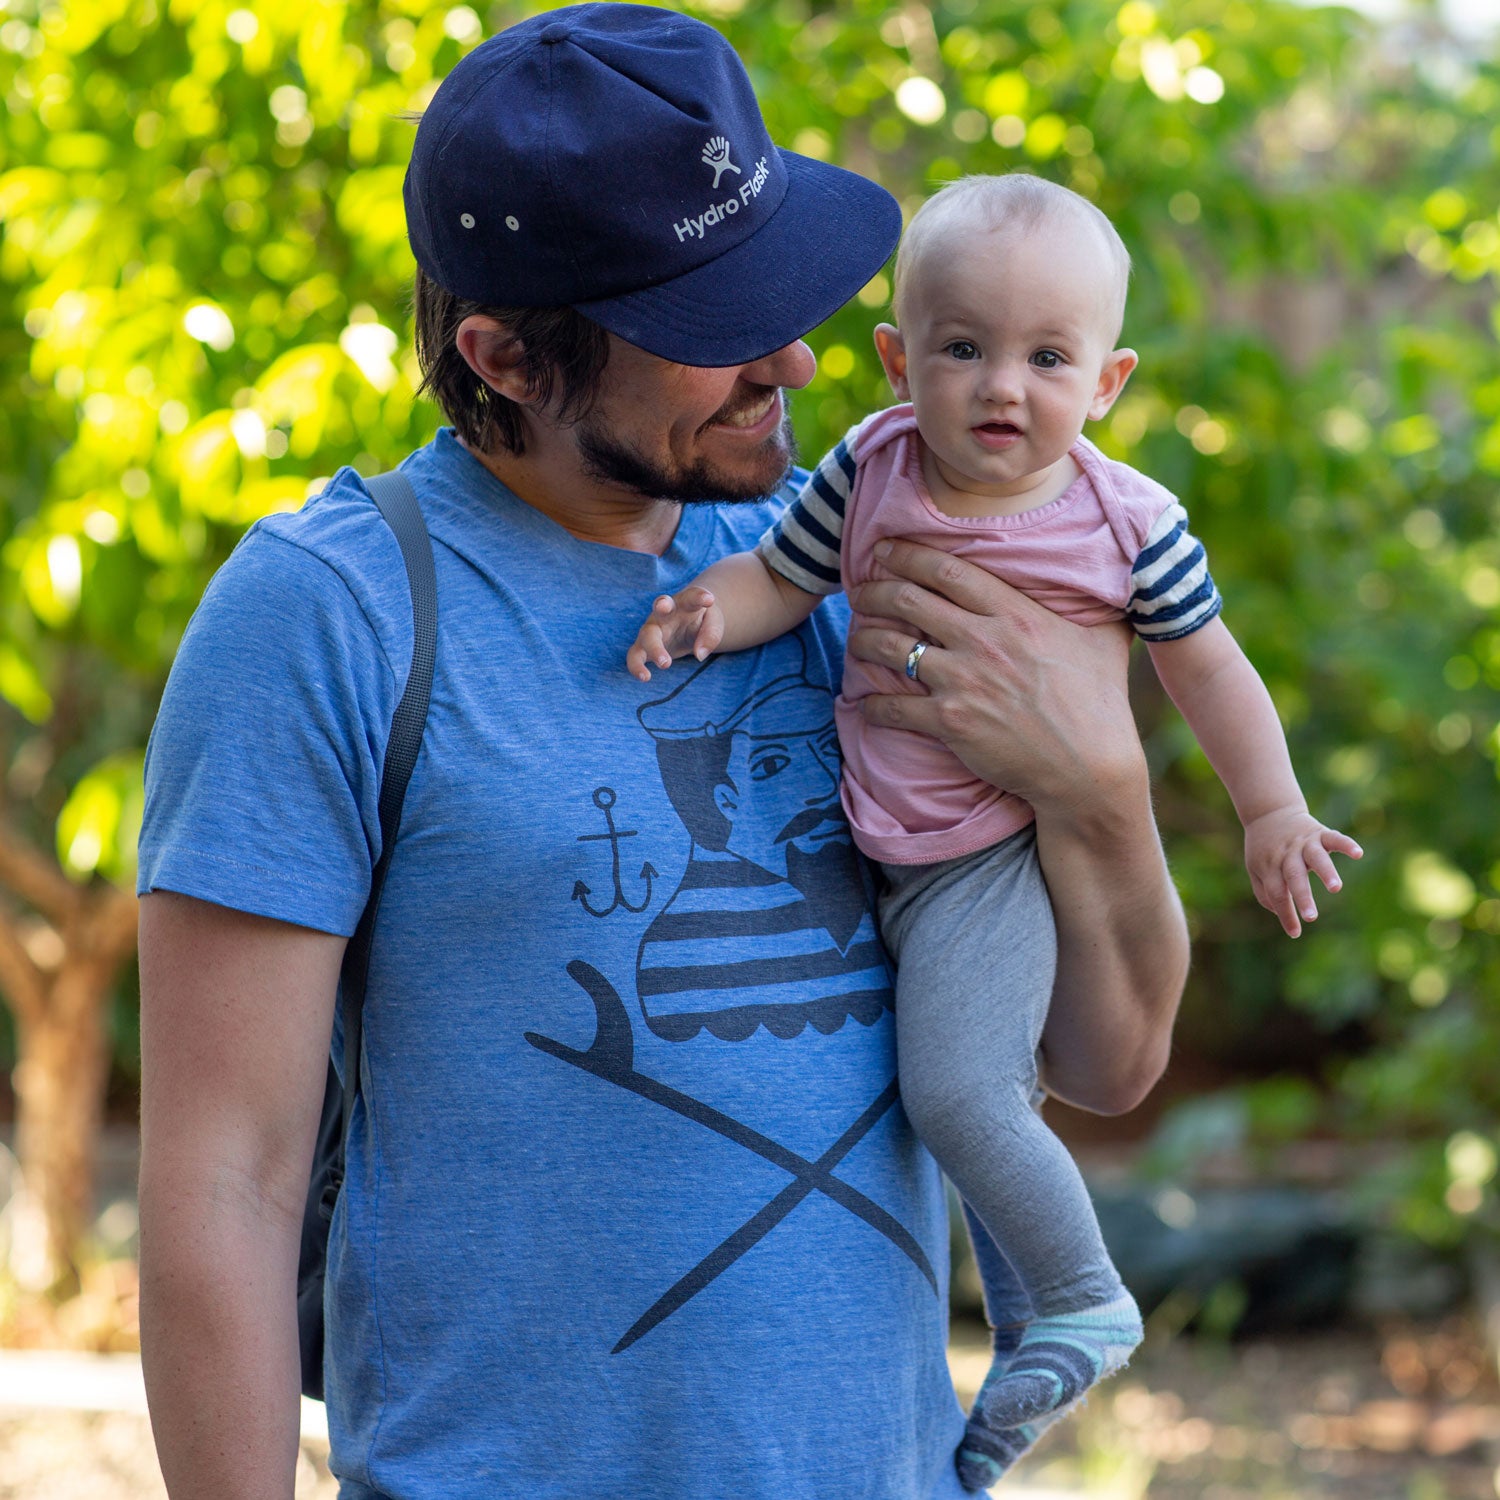 The Best Outdoor Gear for Babies (and Their Dads)